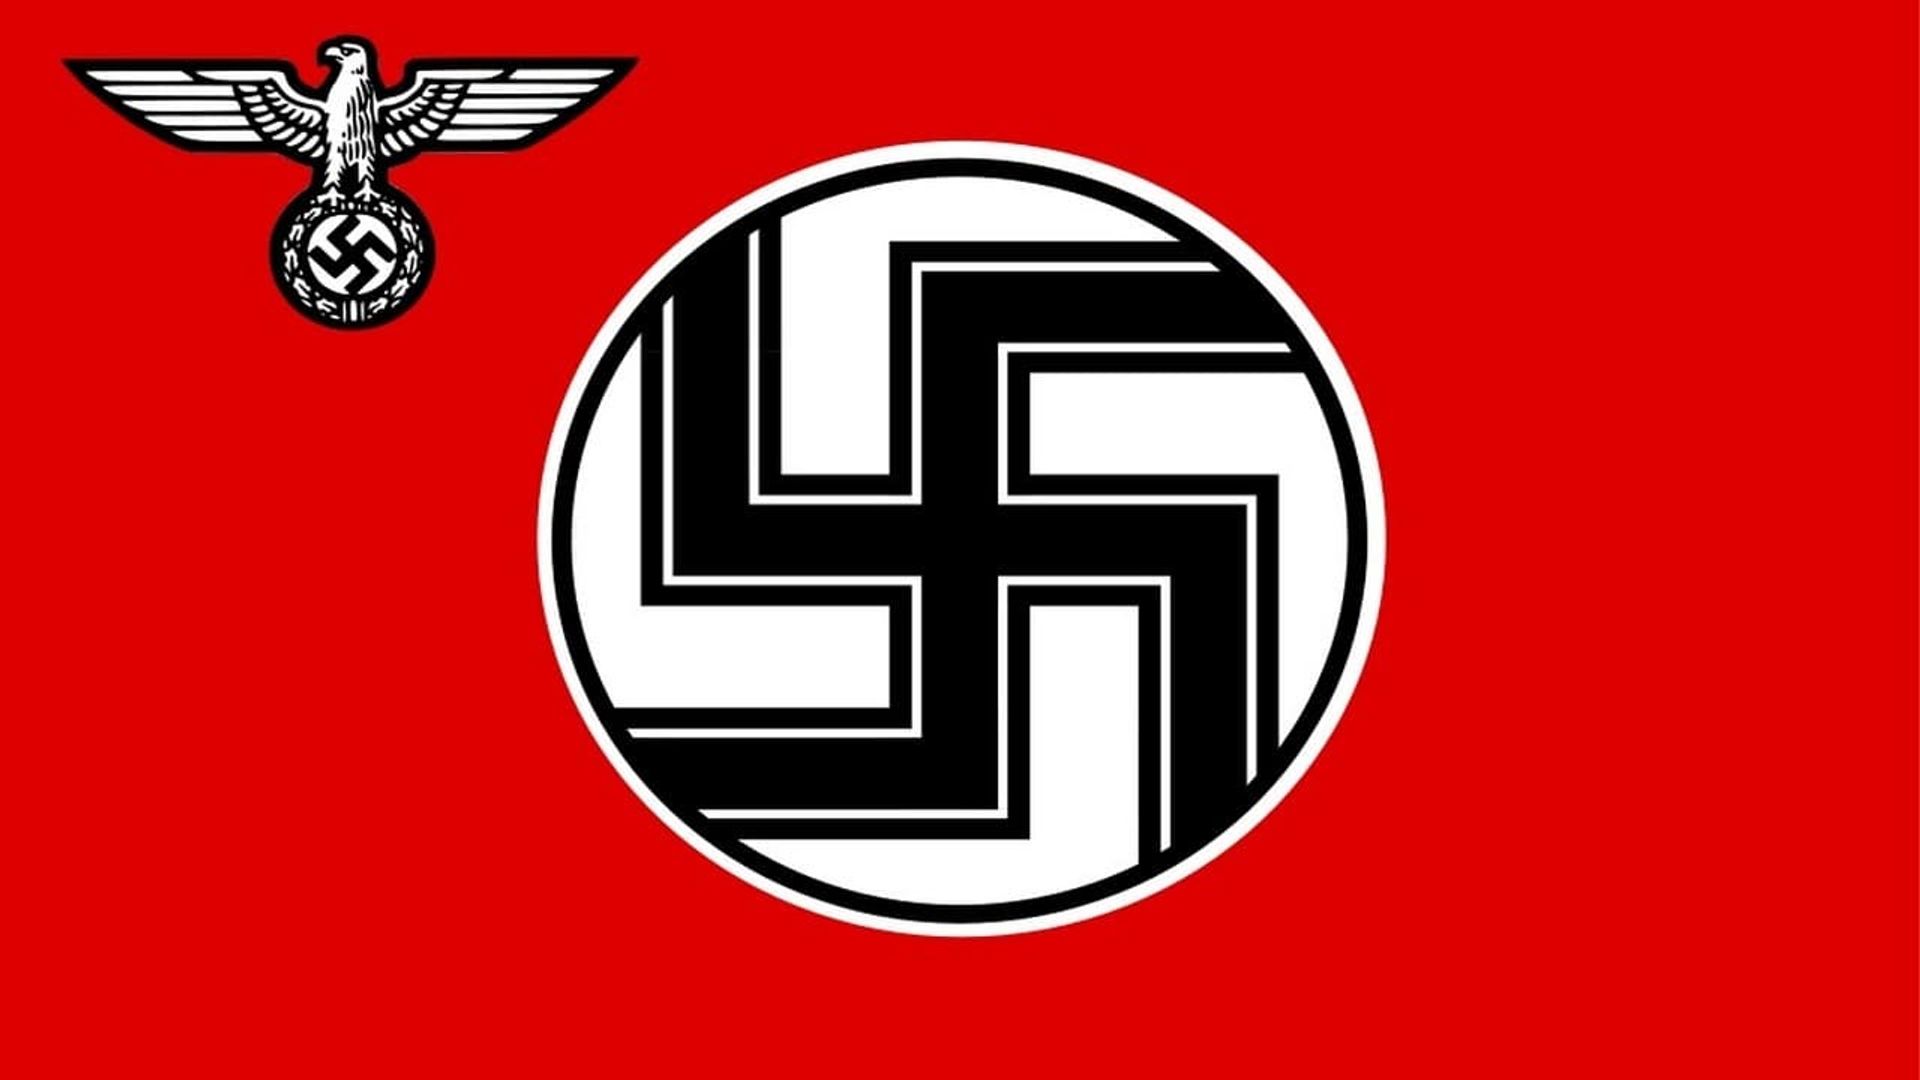 The Fourth Reich background